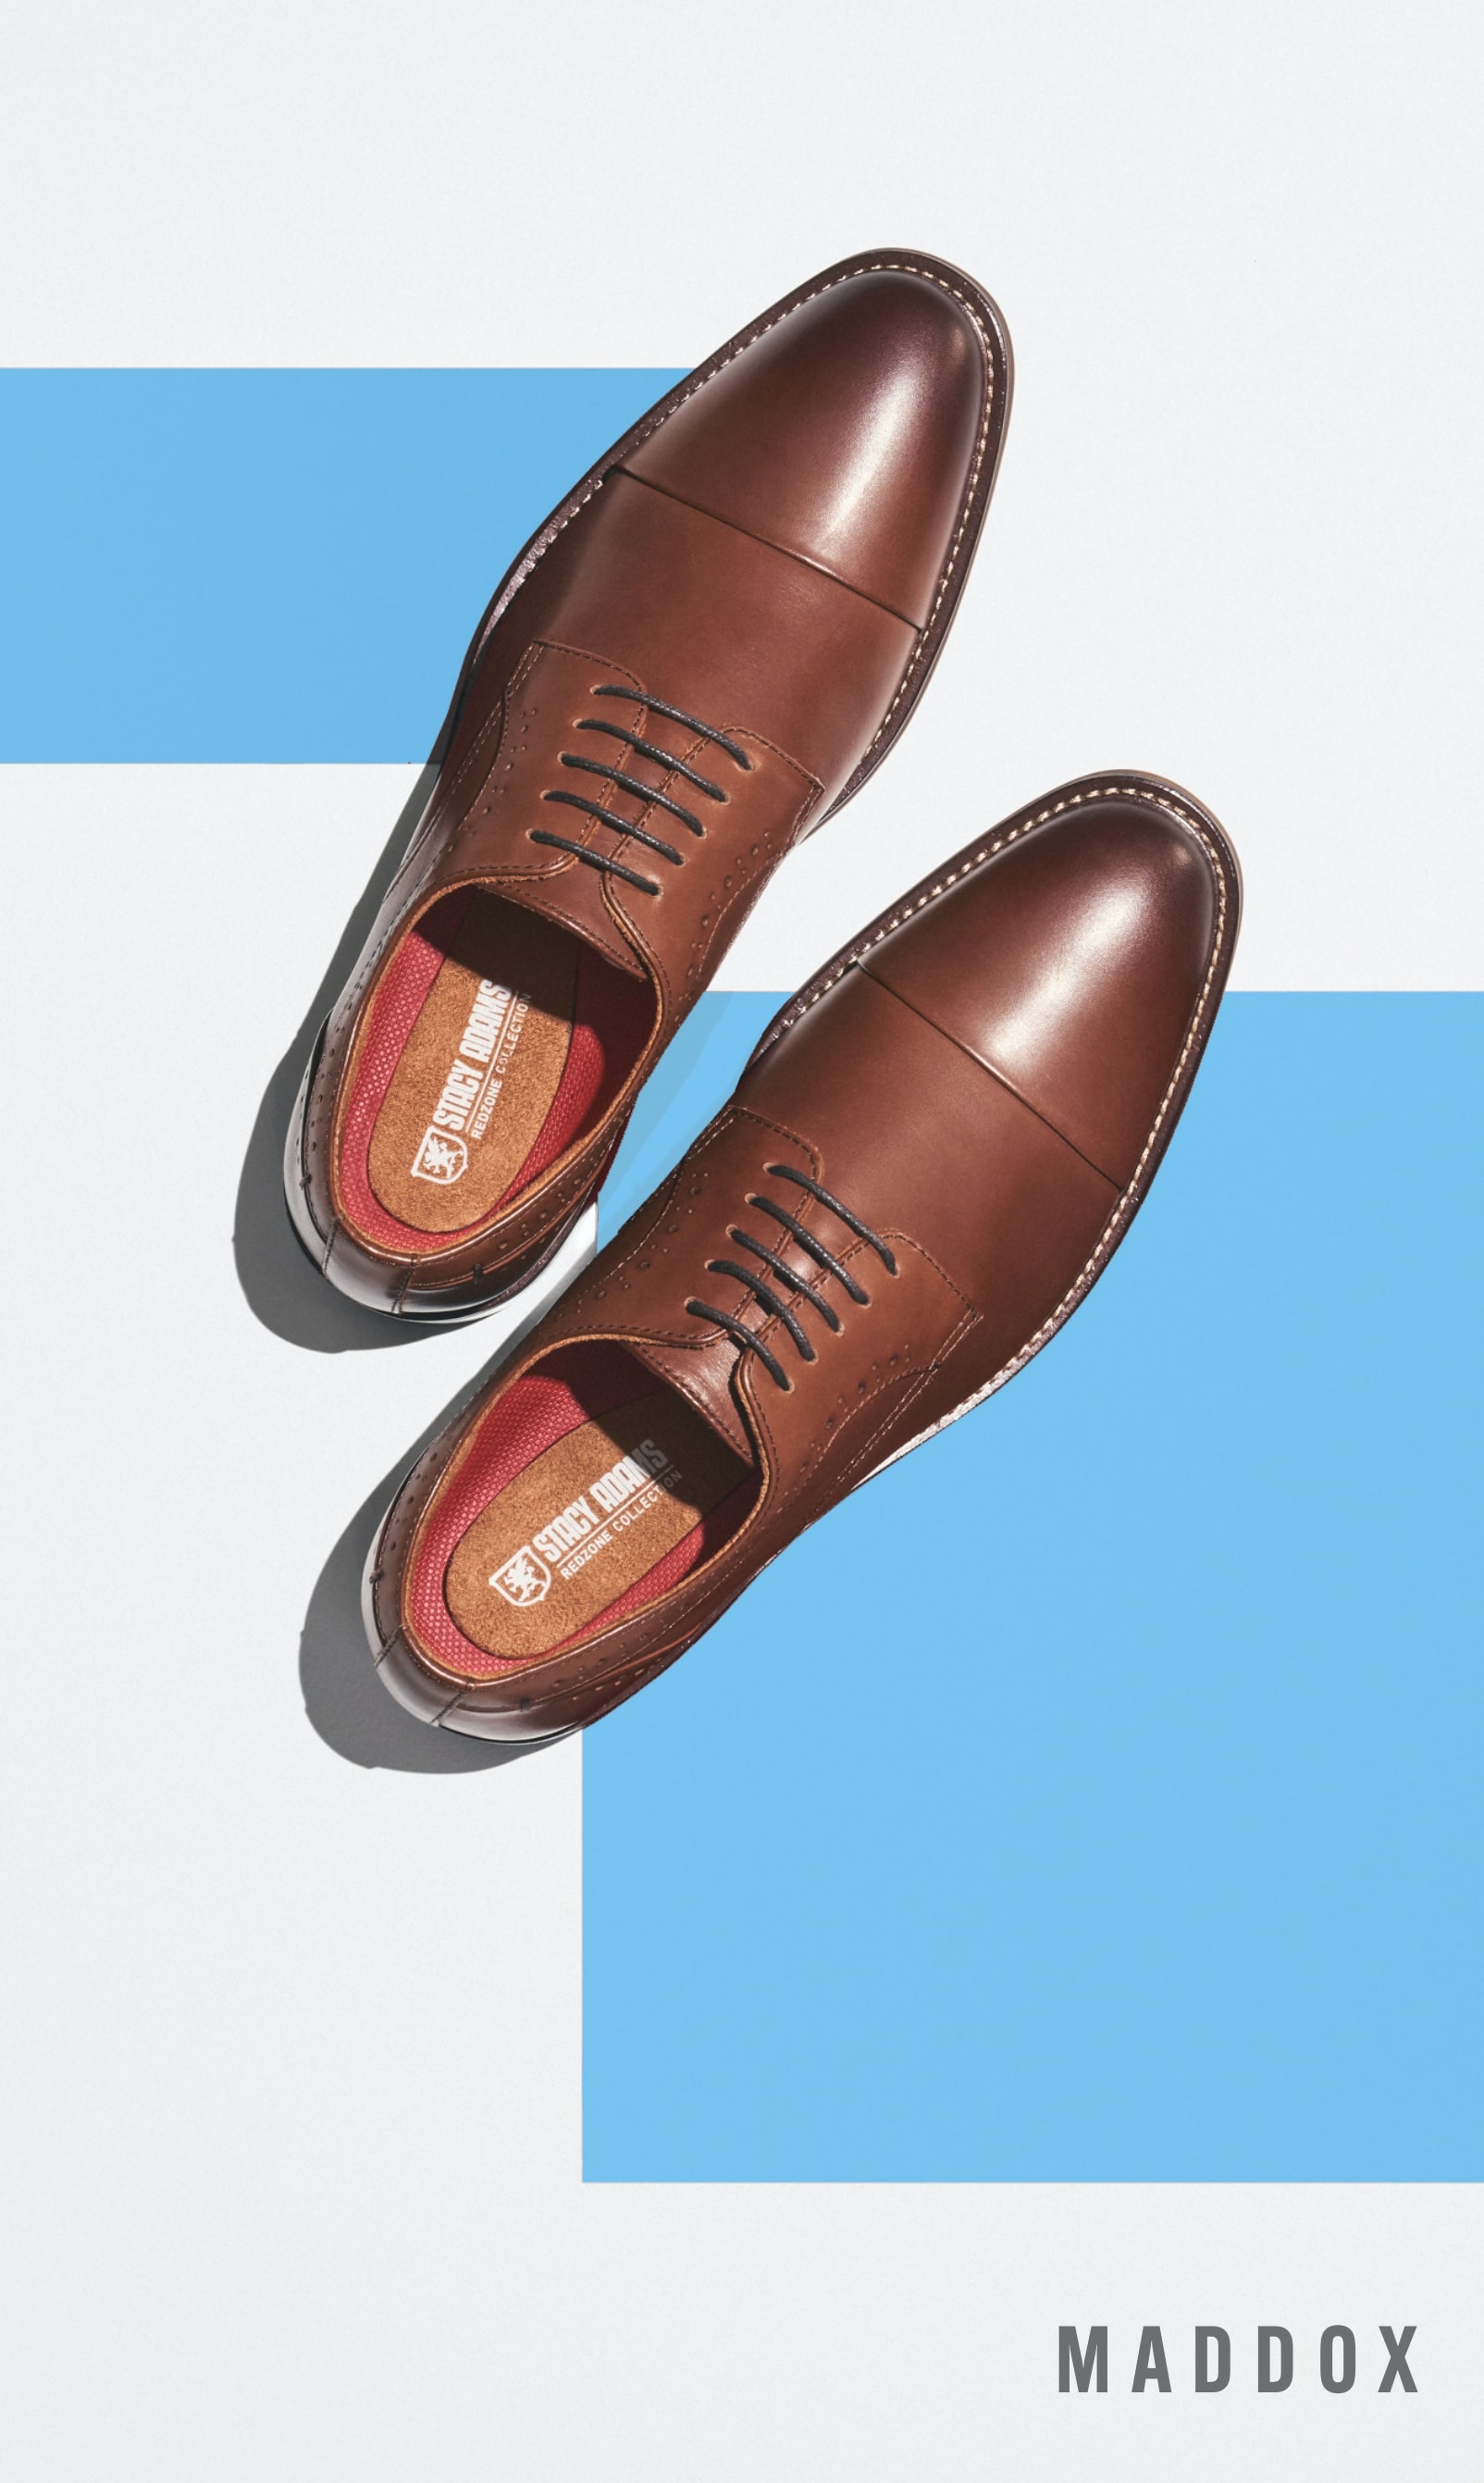 Men's Dress Shoes category. Image features the Maddox in chocolate.